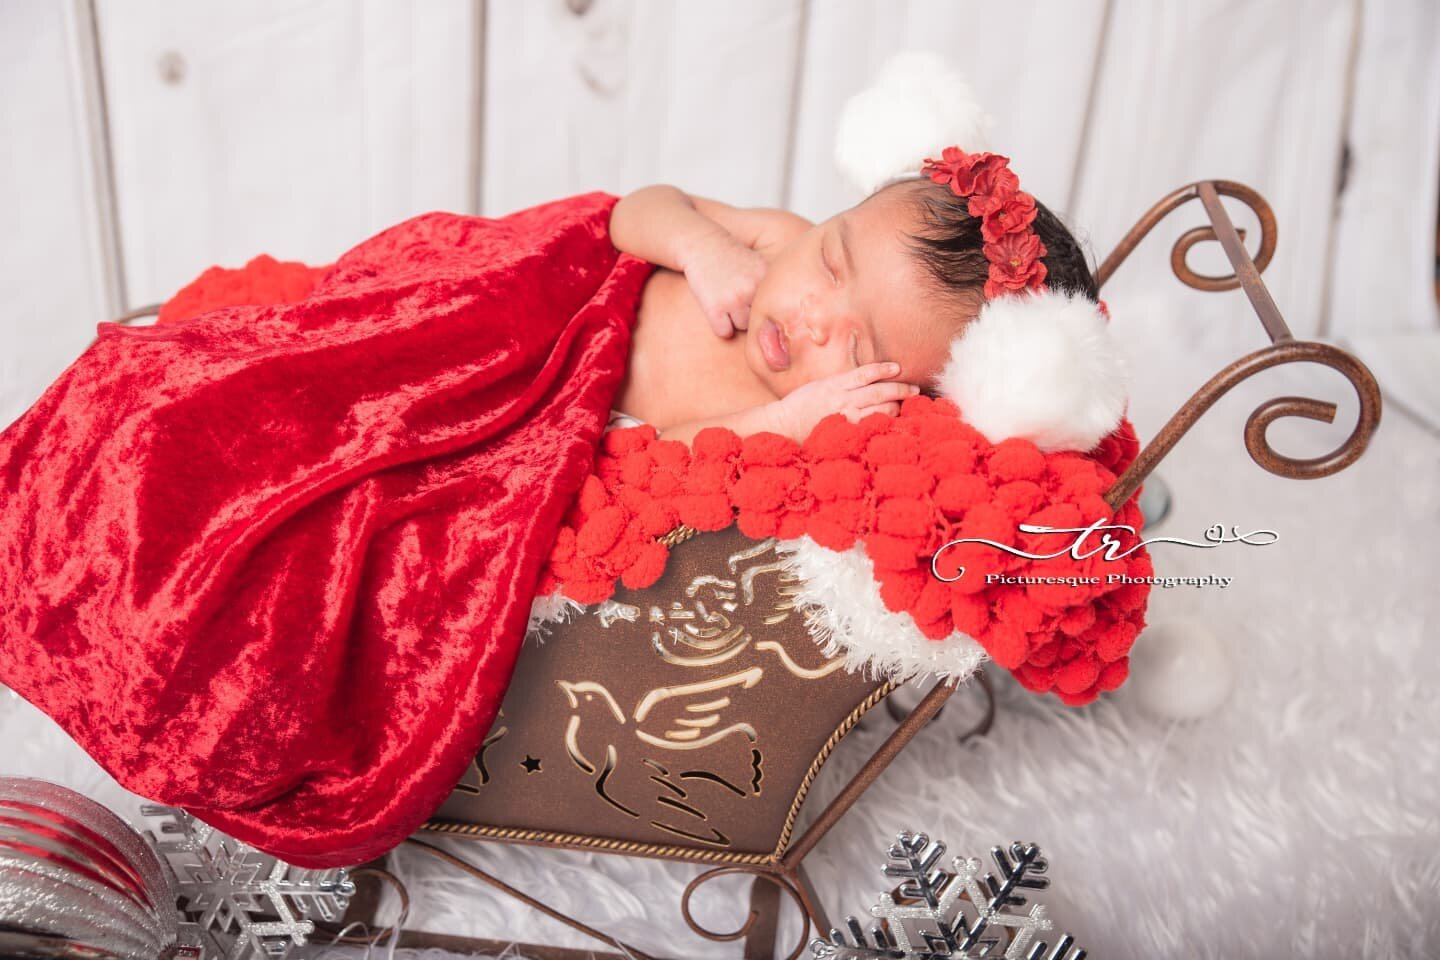 'Twas the night before Christmas
.
#trpicturesque #photography #photographylovers #baby #babies #babyphotographer #newbornphotographer #newbornphotography #newborn #newbornsession #newbornphotos #newbornposing #bestnewbornphotos #photographyprops #ba